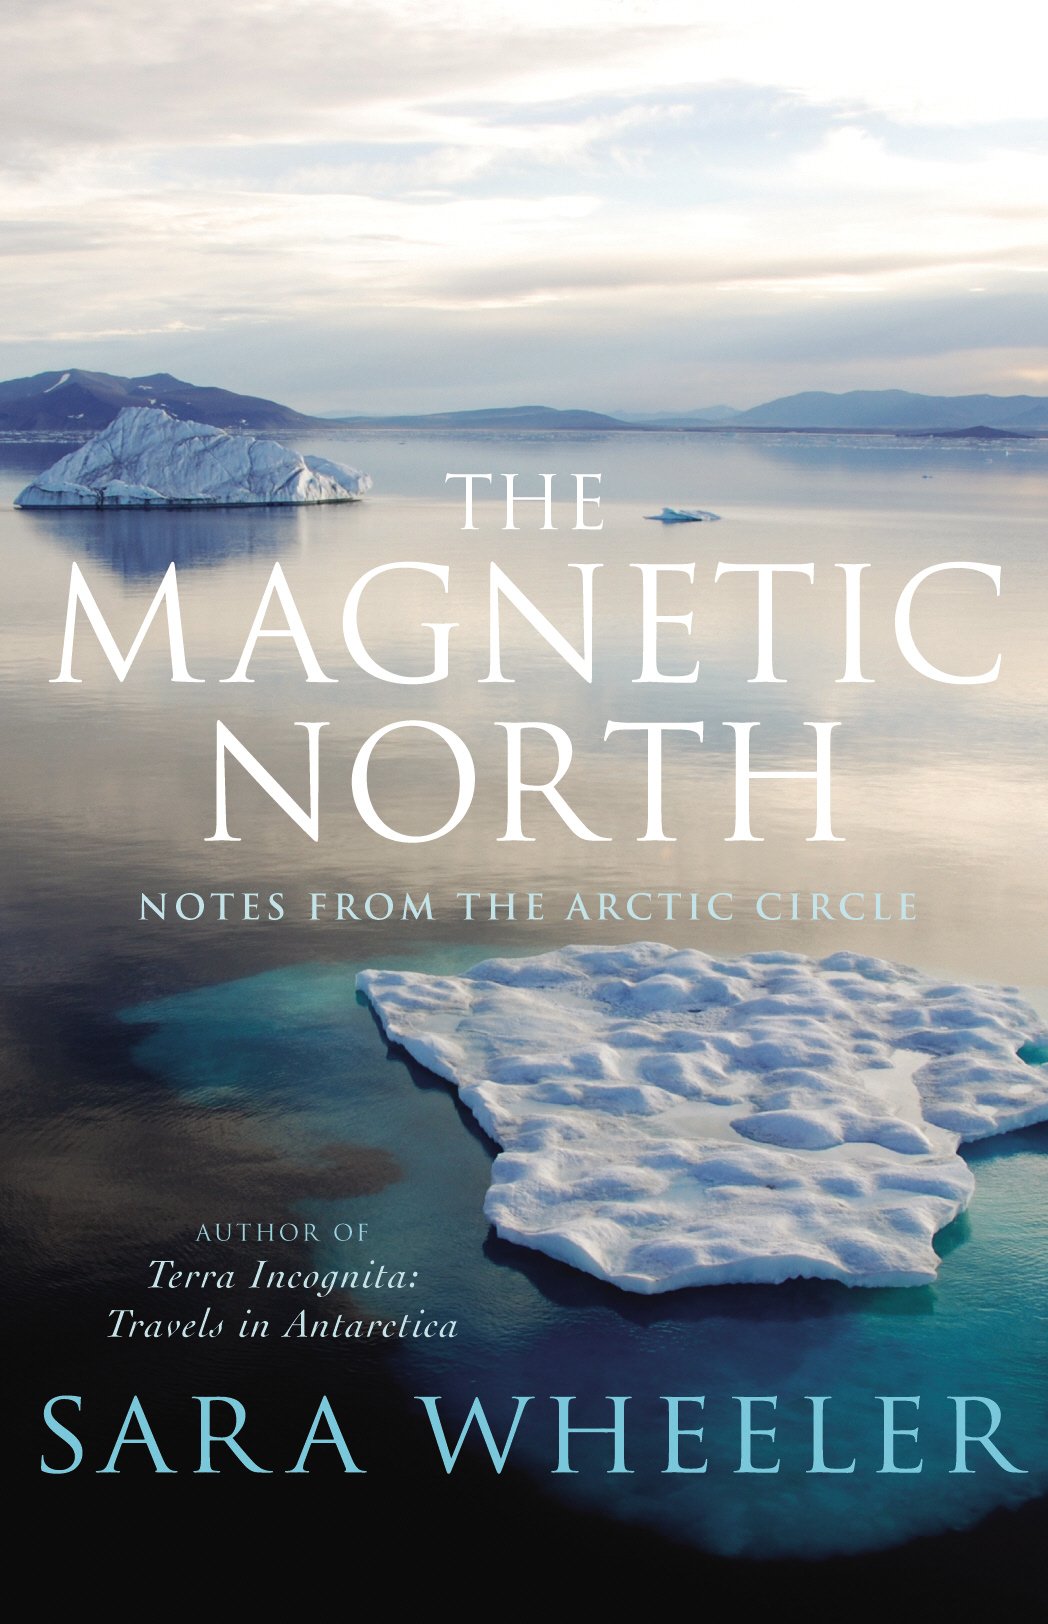 Couverture du livre "The magnetic North : Notes from the Arctic Circle"